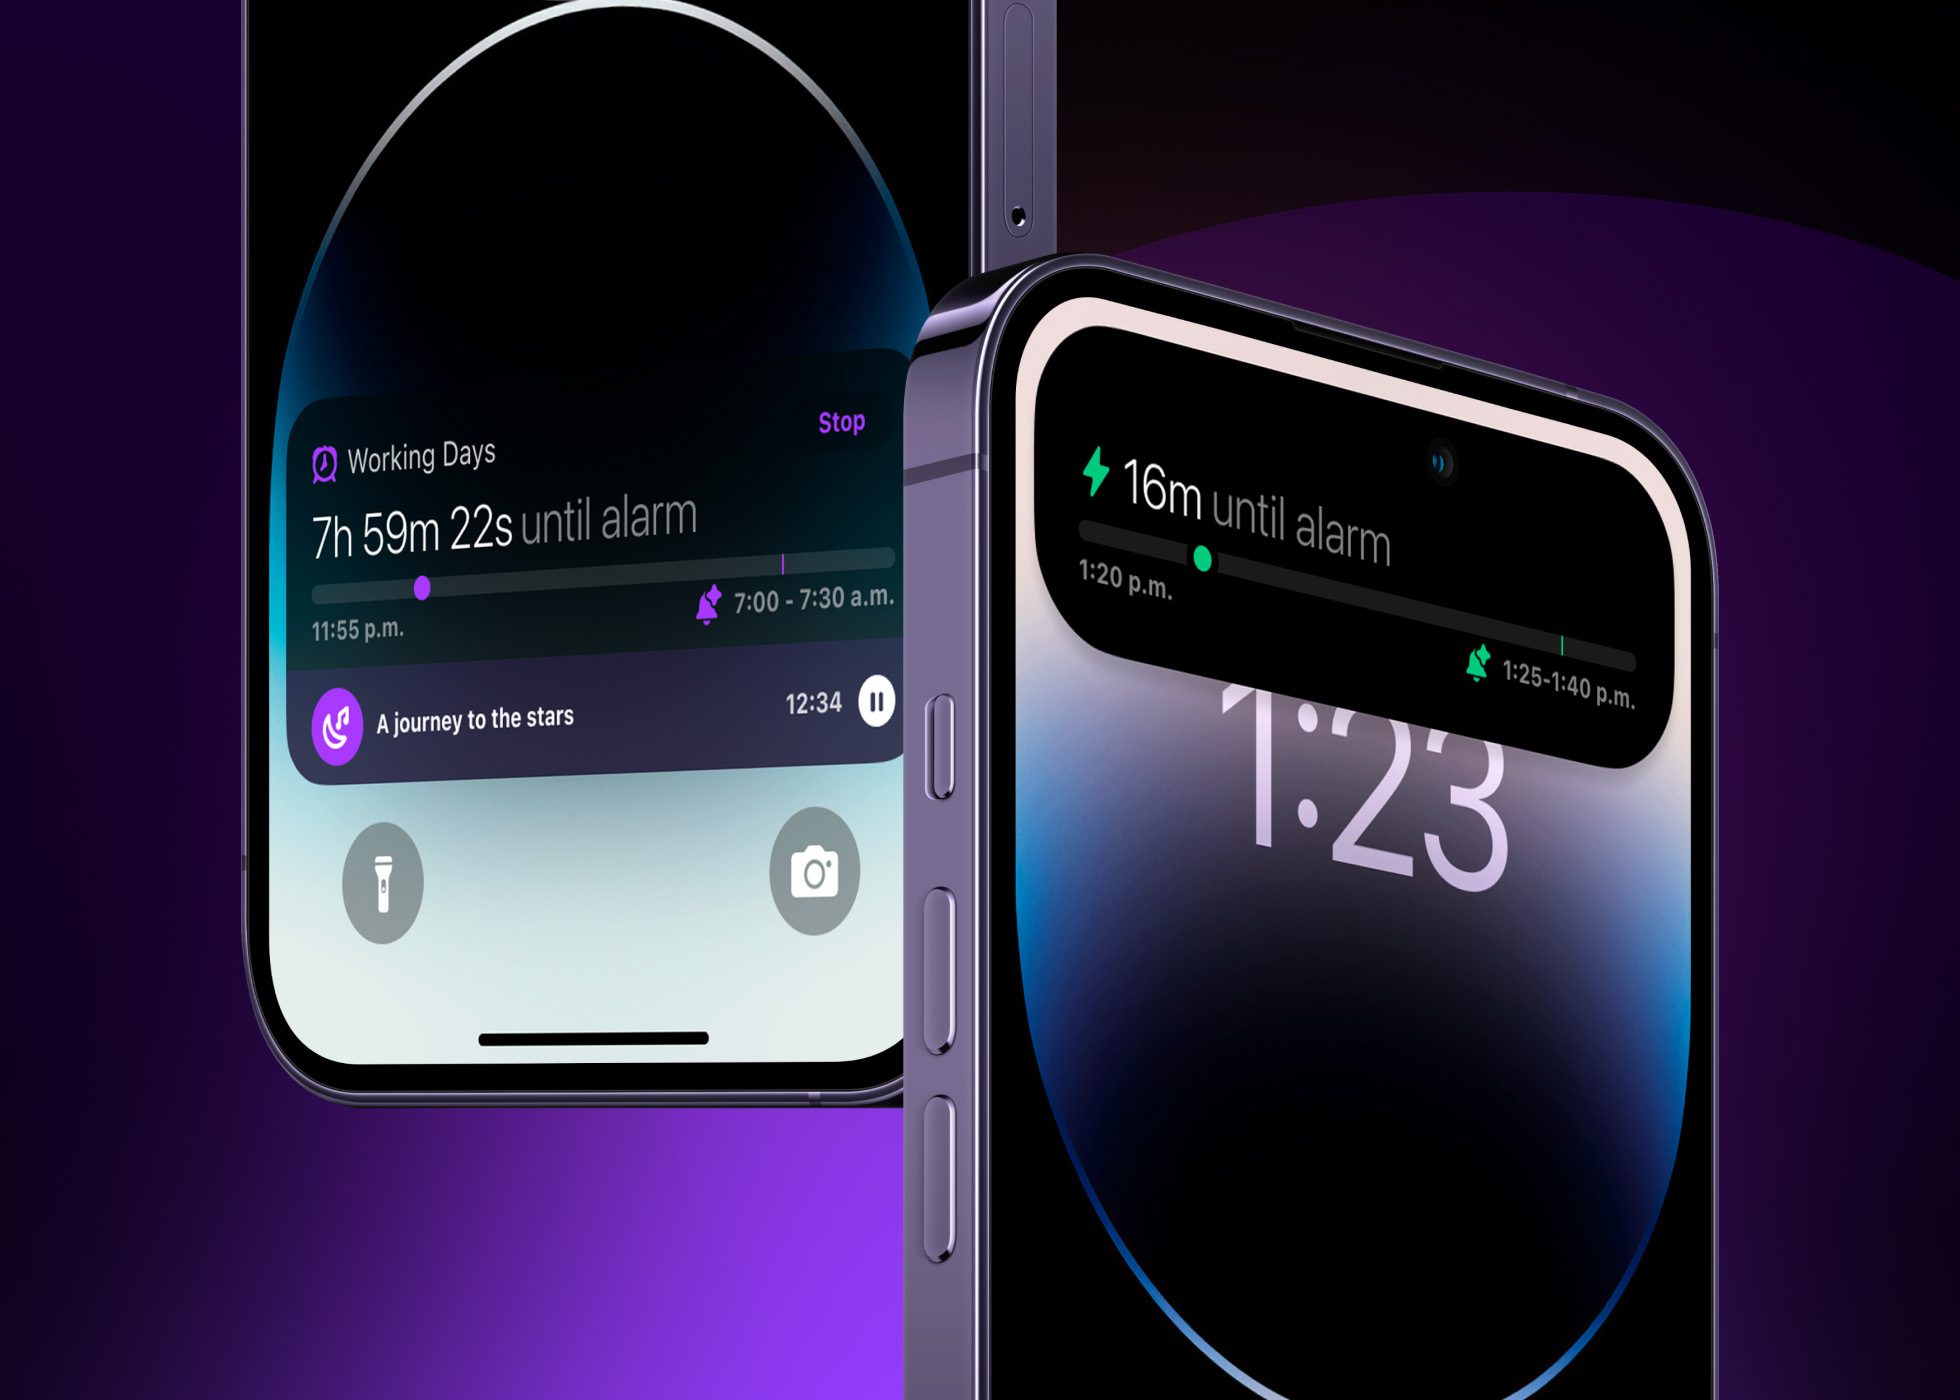 Image of two iPhone devices that display Pillow's Live Activities